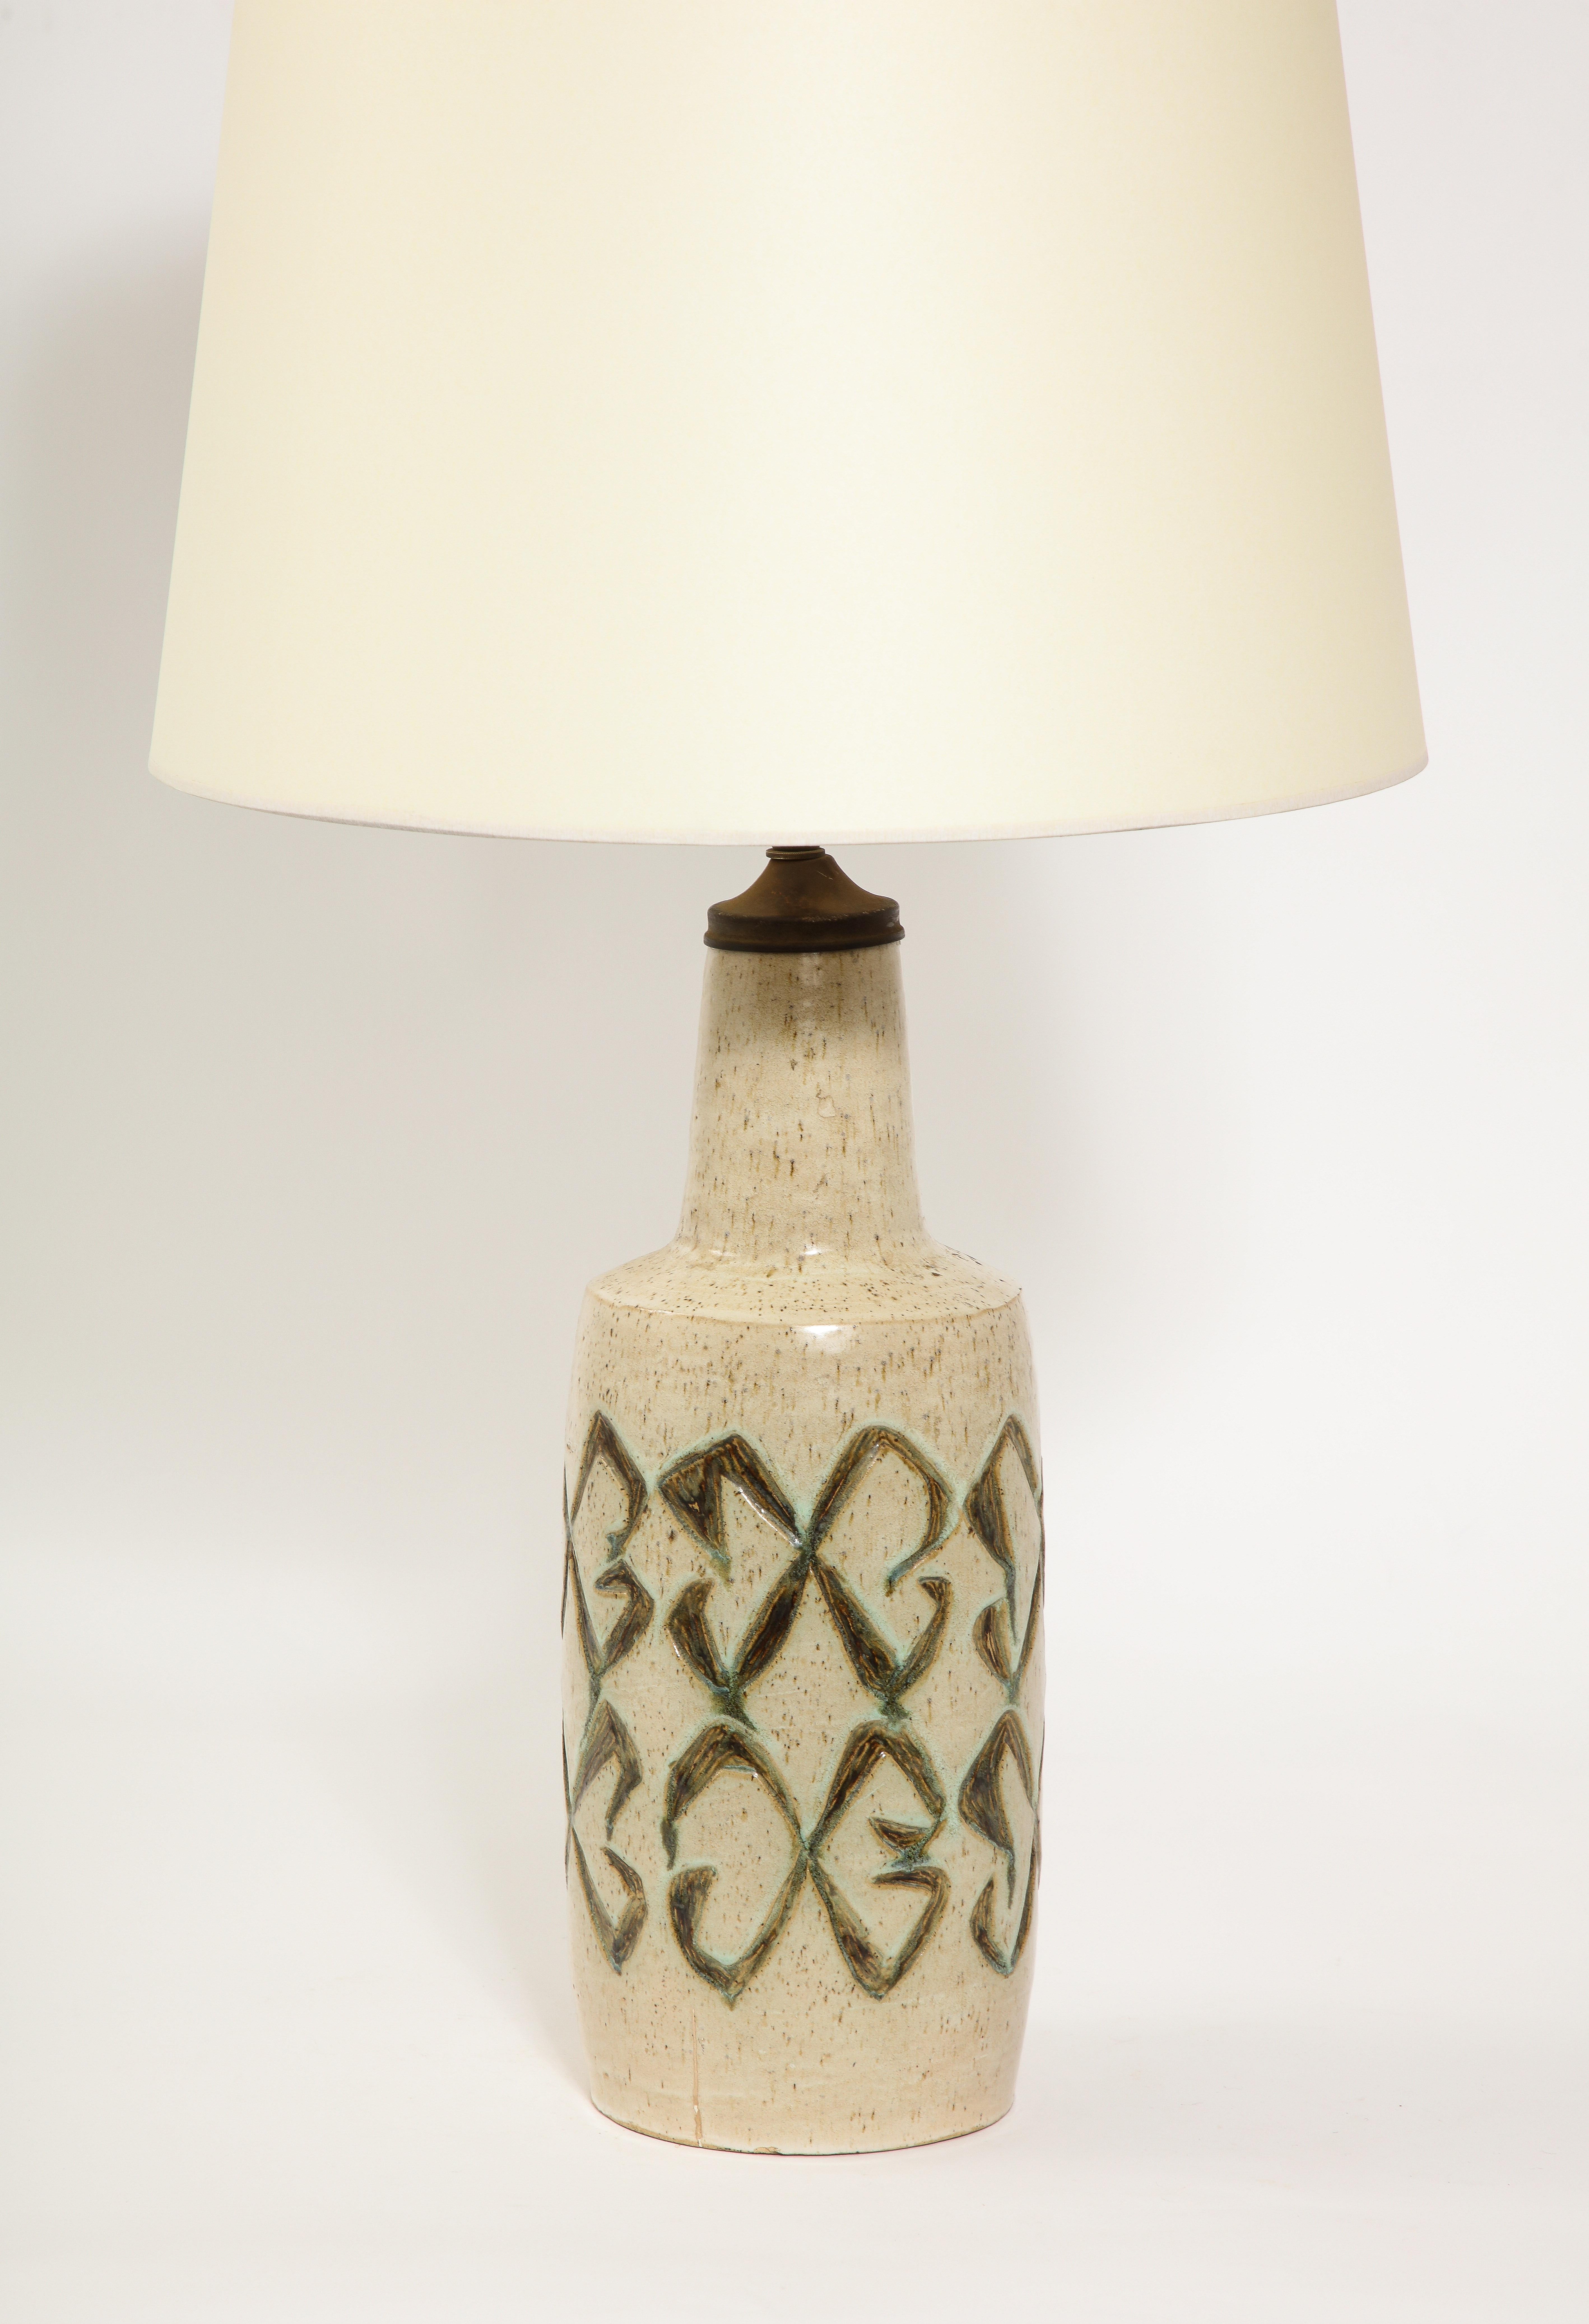 Green & Tan Abstract Pattern Ceramic Lamp, USA 1960's For Sale 5